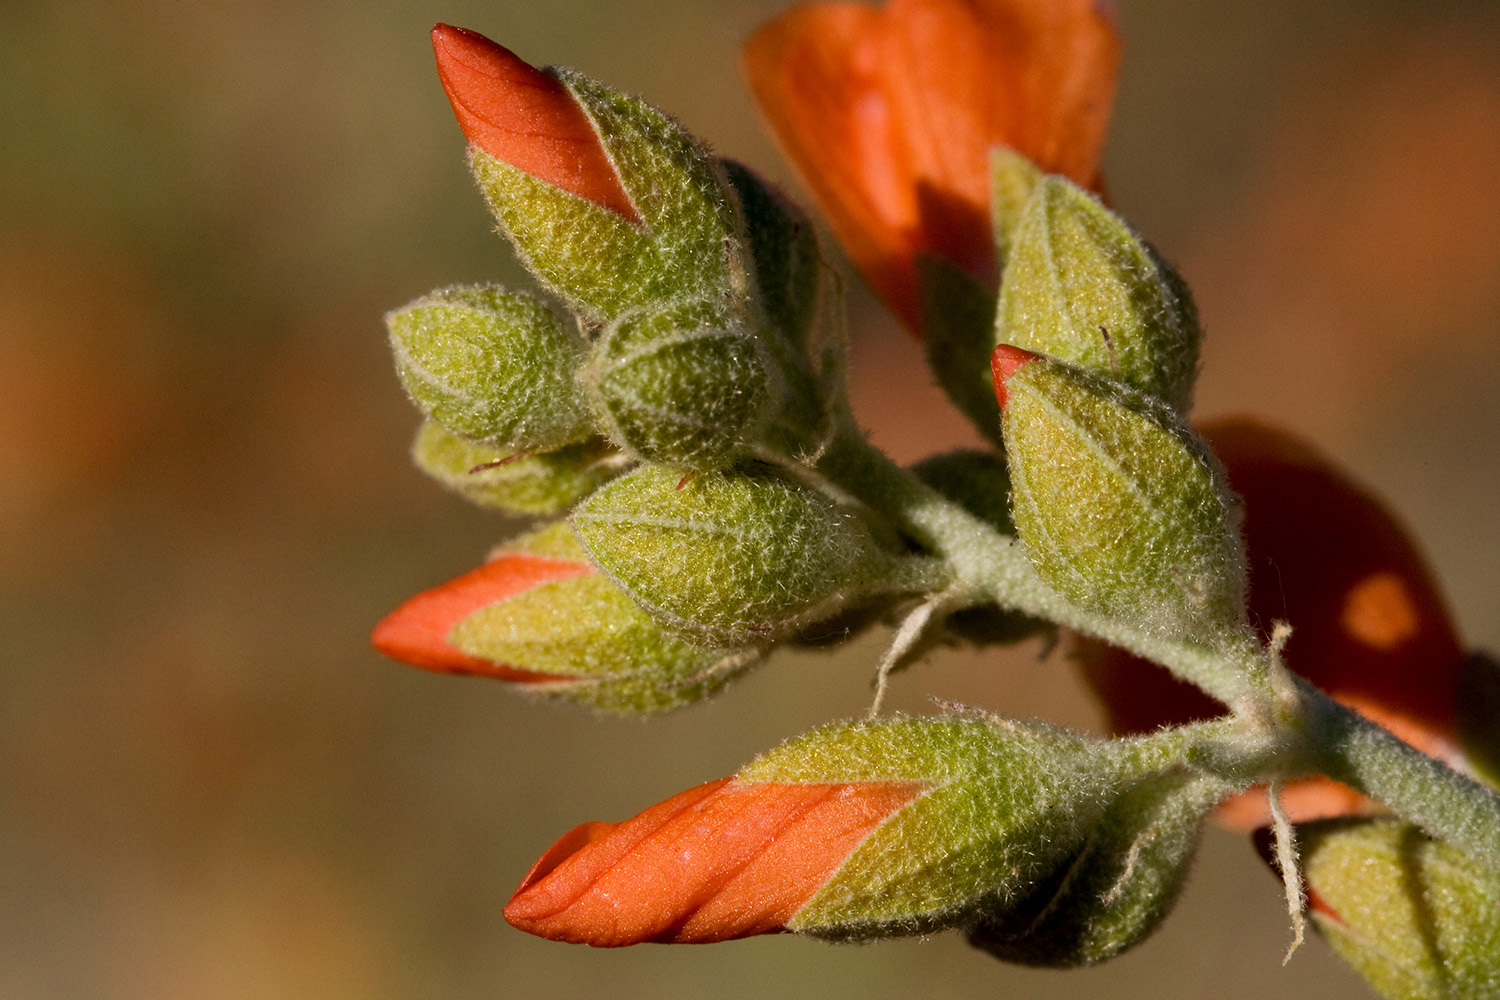 Bud just beginning to open. Red-orange petals are peeking out of fuzzy, green sepals.